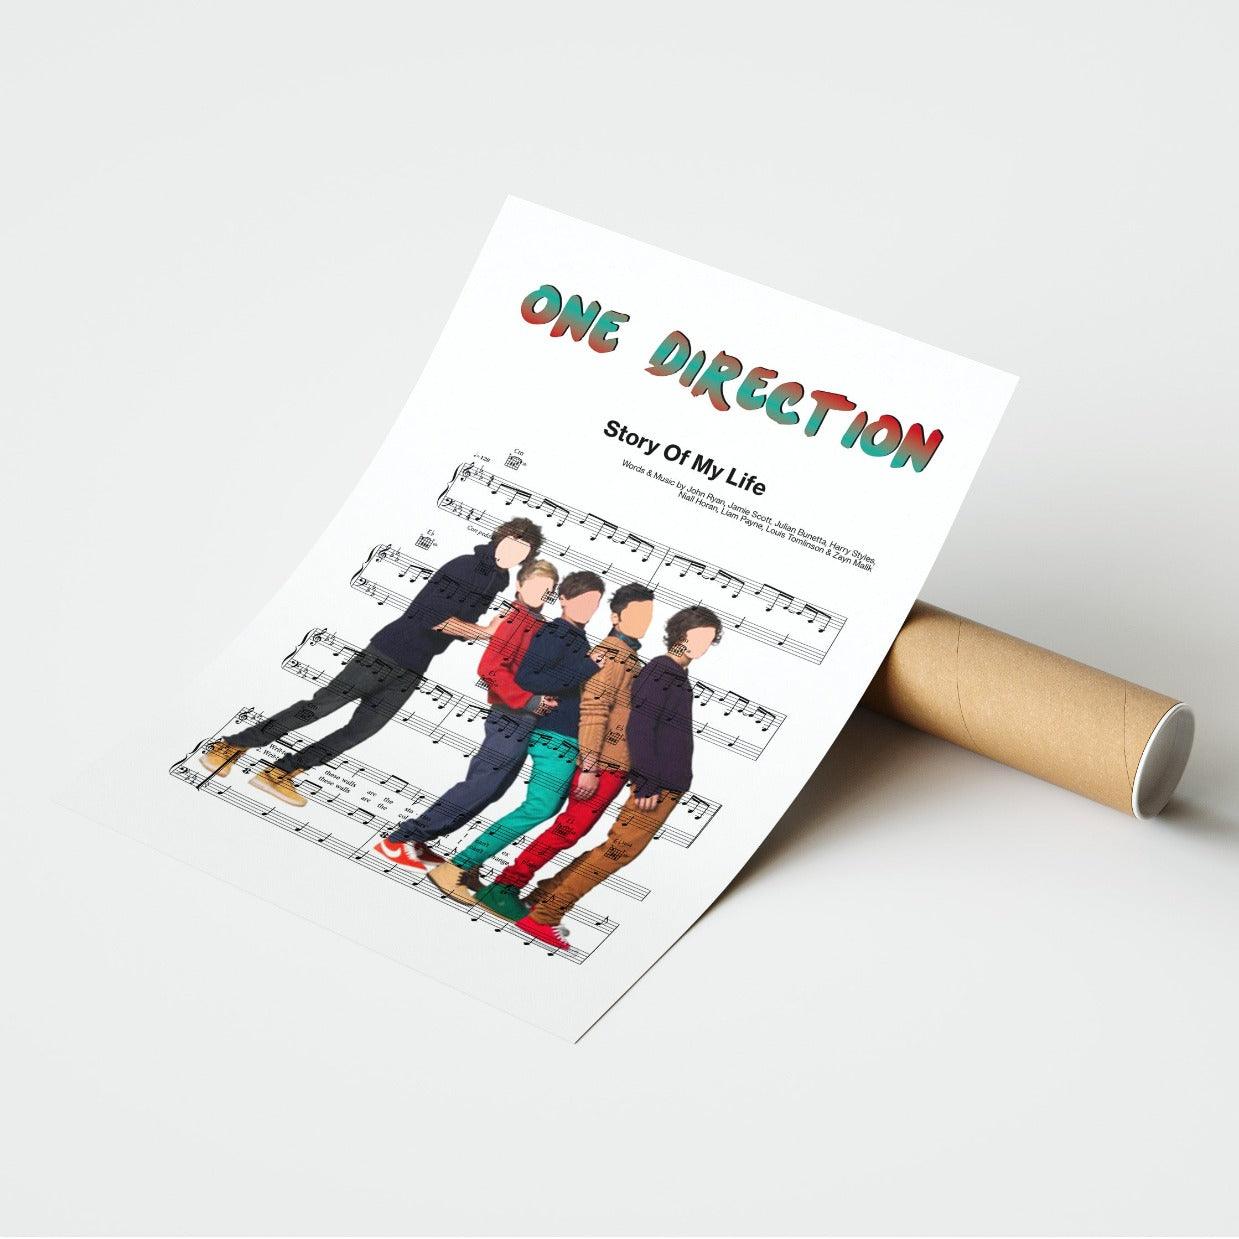 Looking for a way to show your dedication to your favorite band? Check out our One Direction - Story of My Life Poster. This high quality print is a great way to show your love for the band. The lyrics are inspired by the music and make for an attractive and unique piece of art. Hang it in your bedroom, dorm room or anywhere you want to show your musical taste.